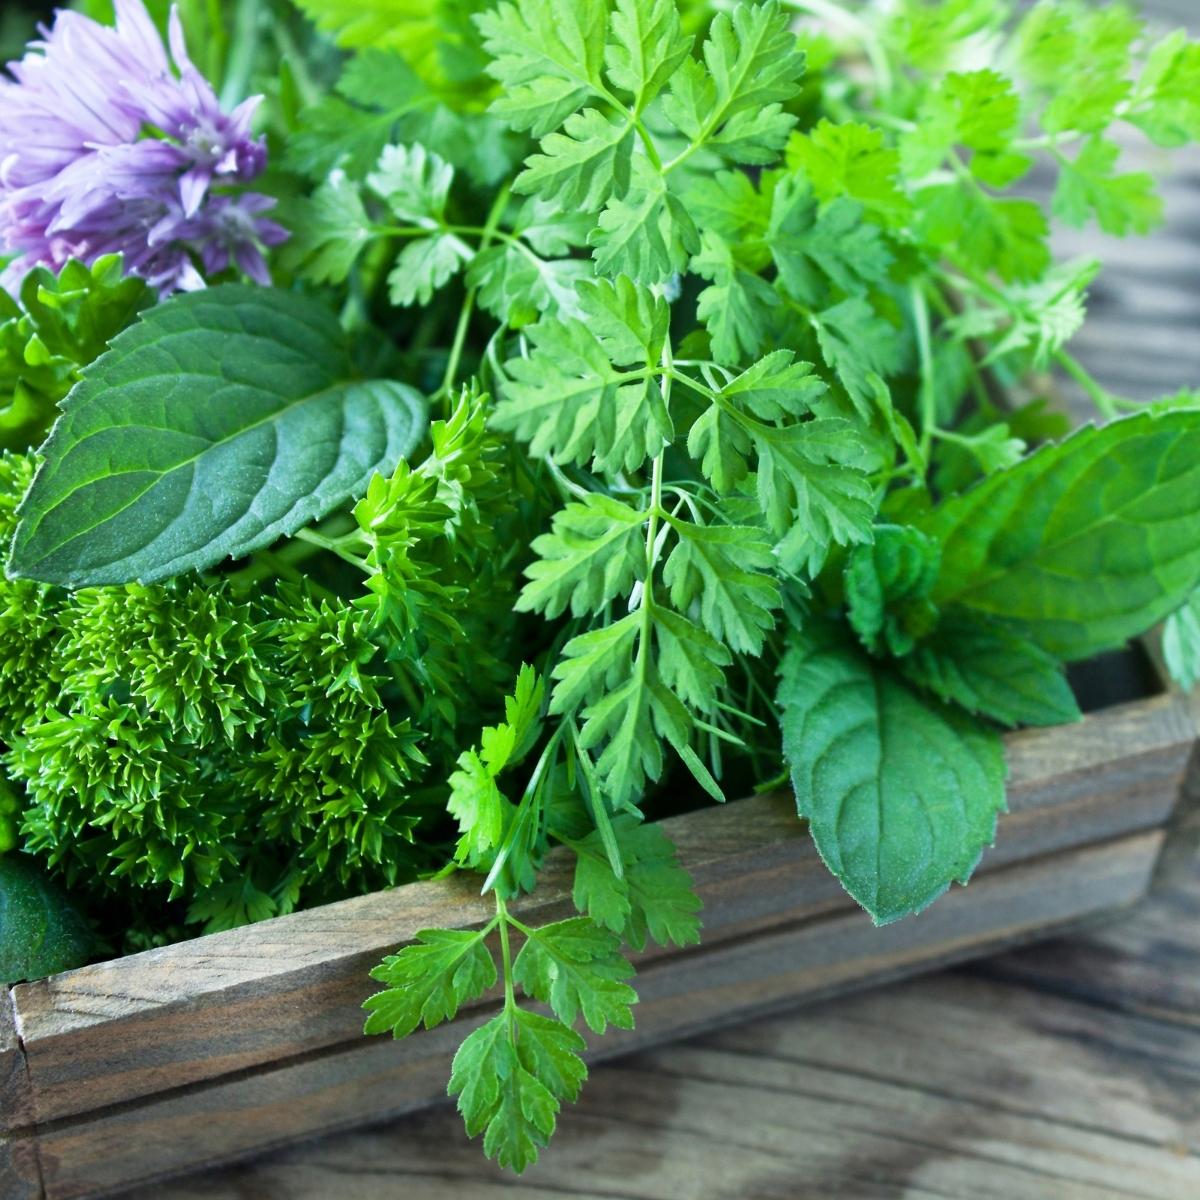 A small wooden crate filled with parsley, mint, and purple chive flowers.